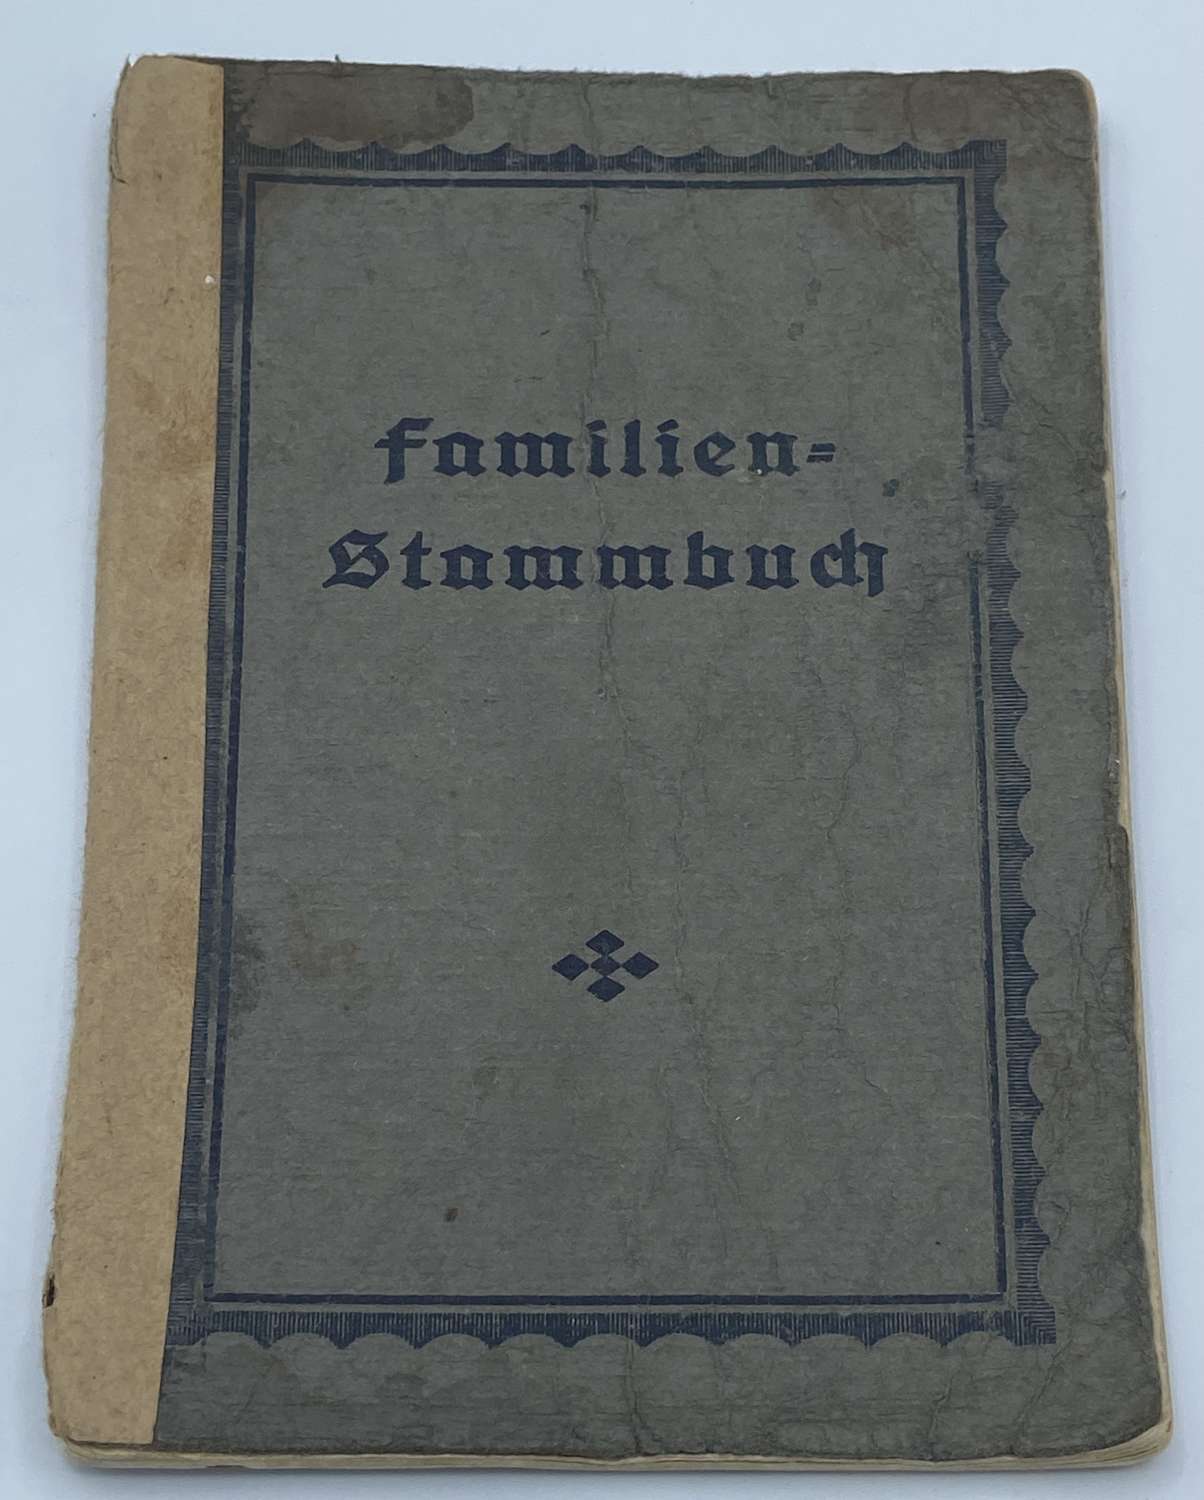 WW2 German Issued Filled Out Family register (Familienstammbuch)